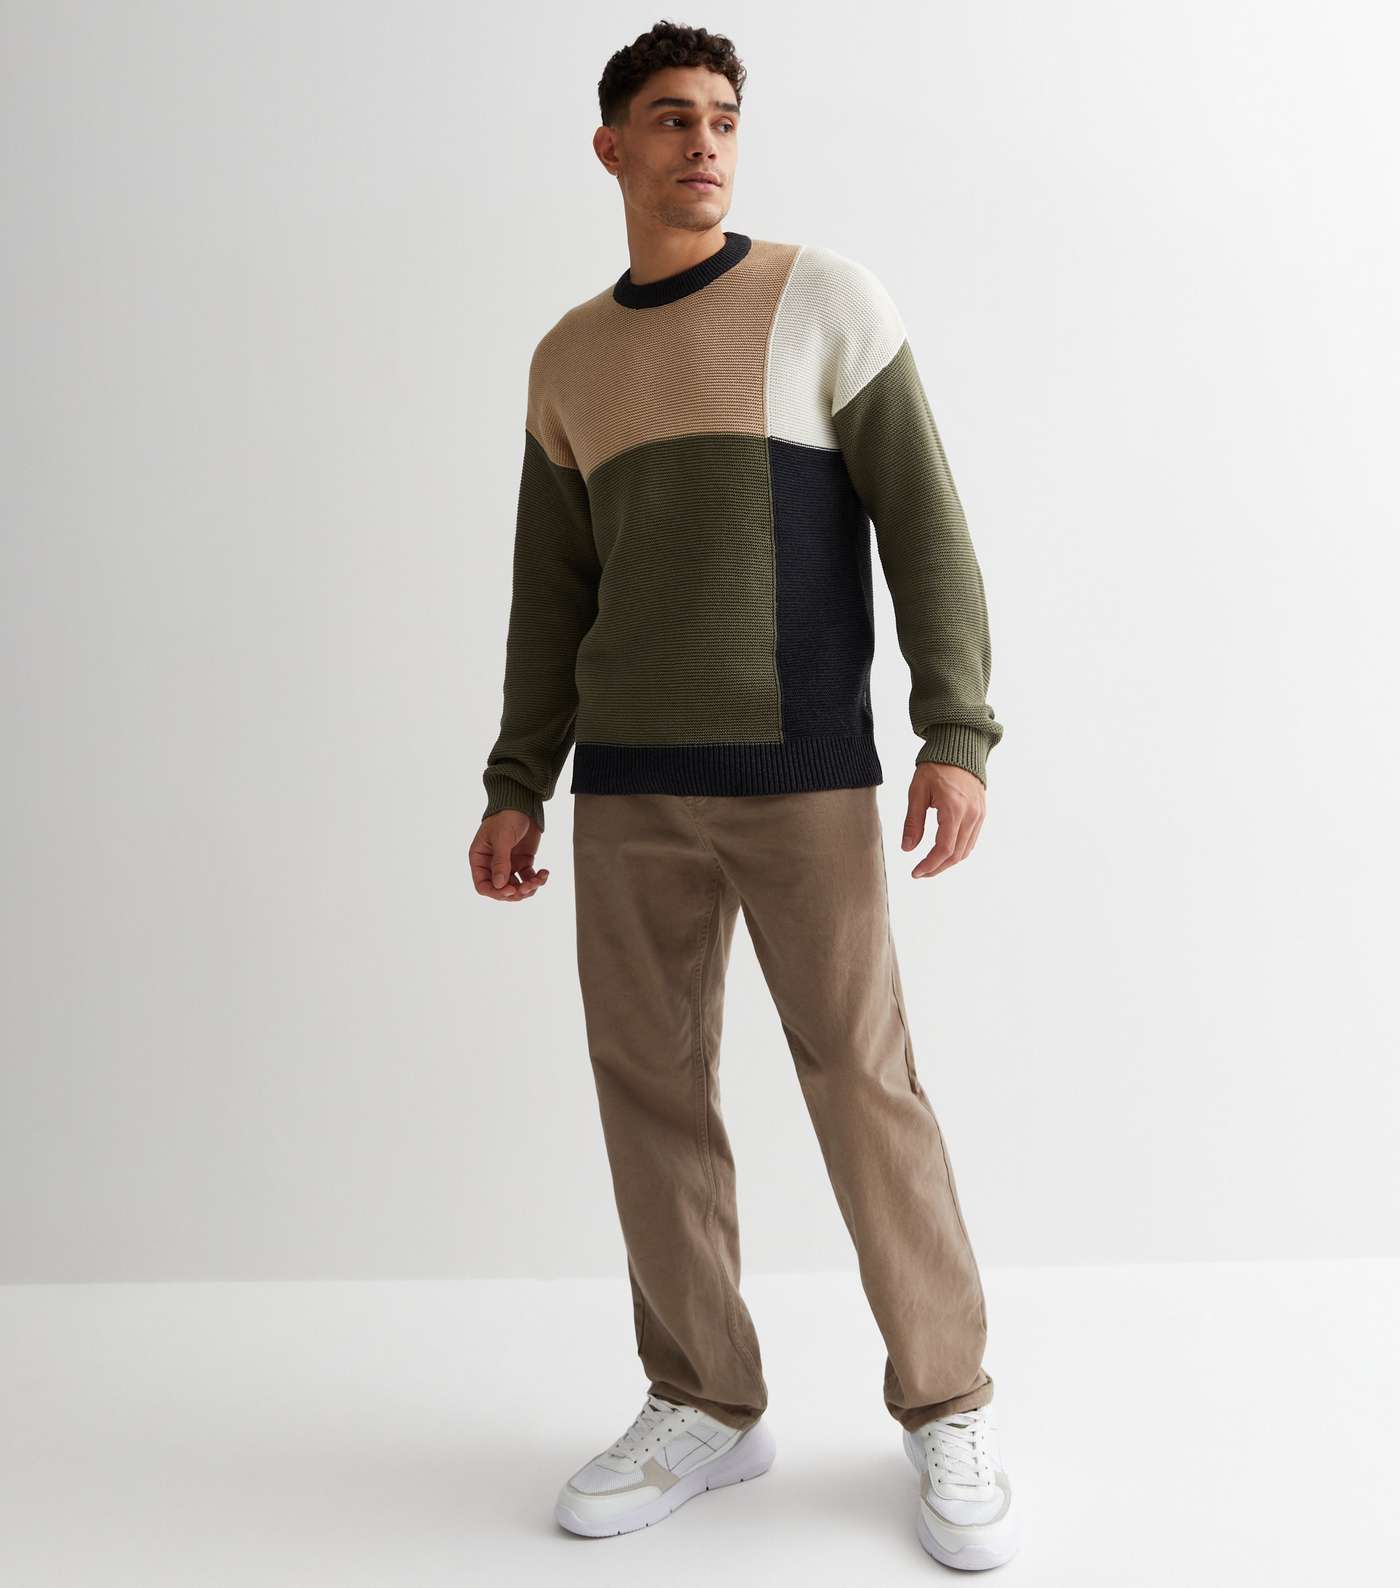 Only & Sons Stone Colour Block Knit Jumper Image 2